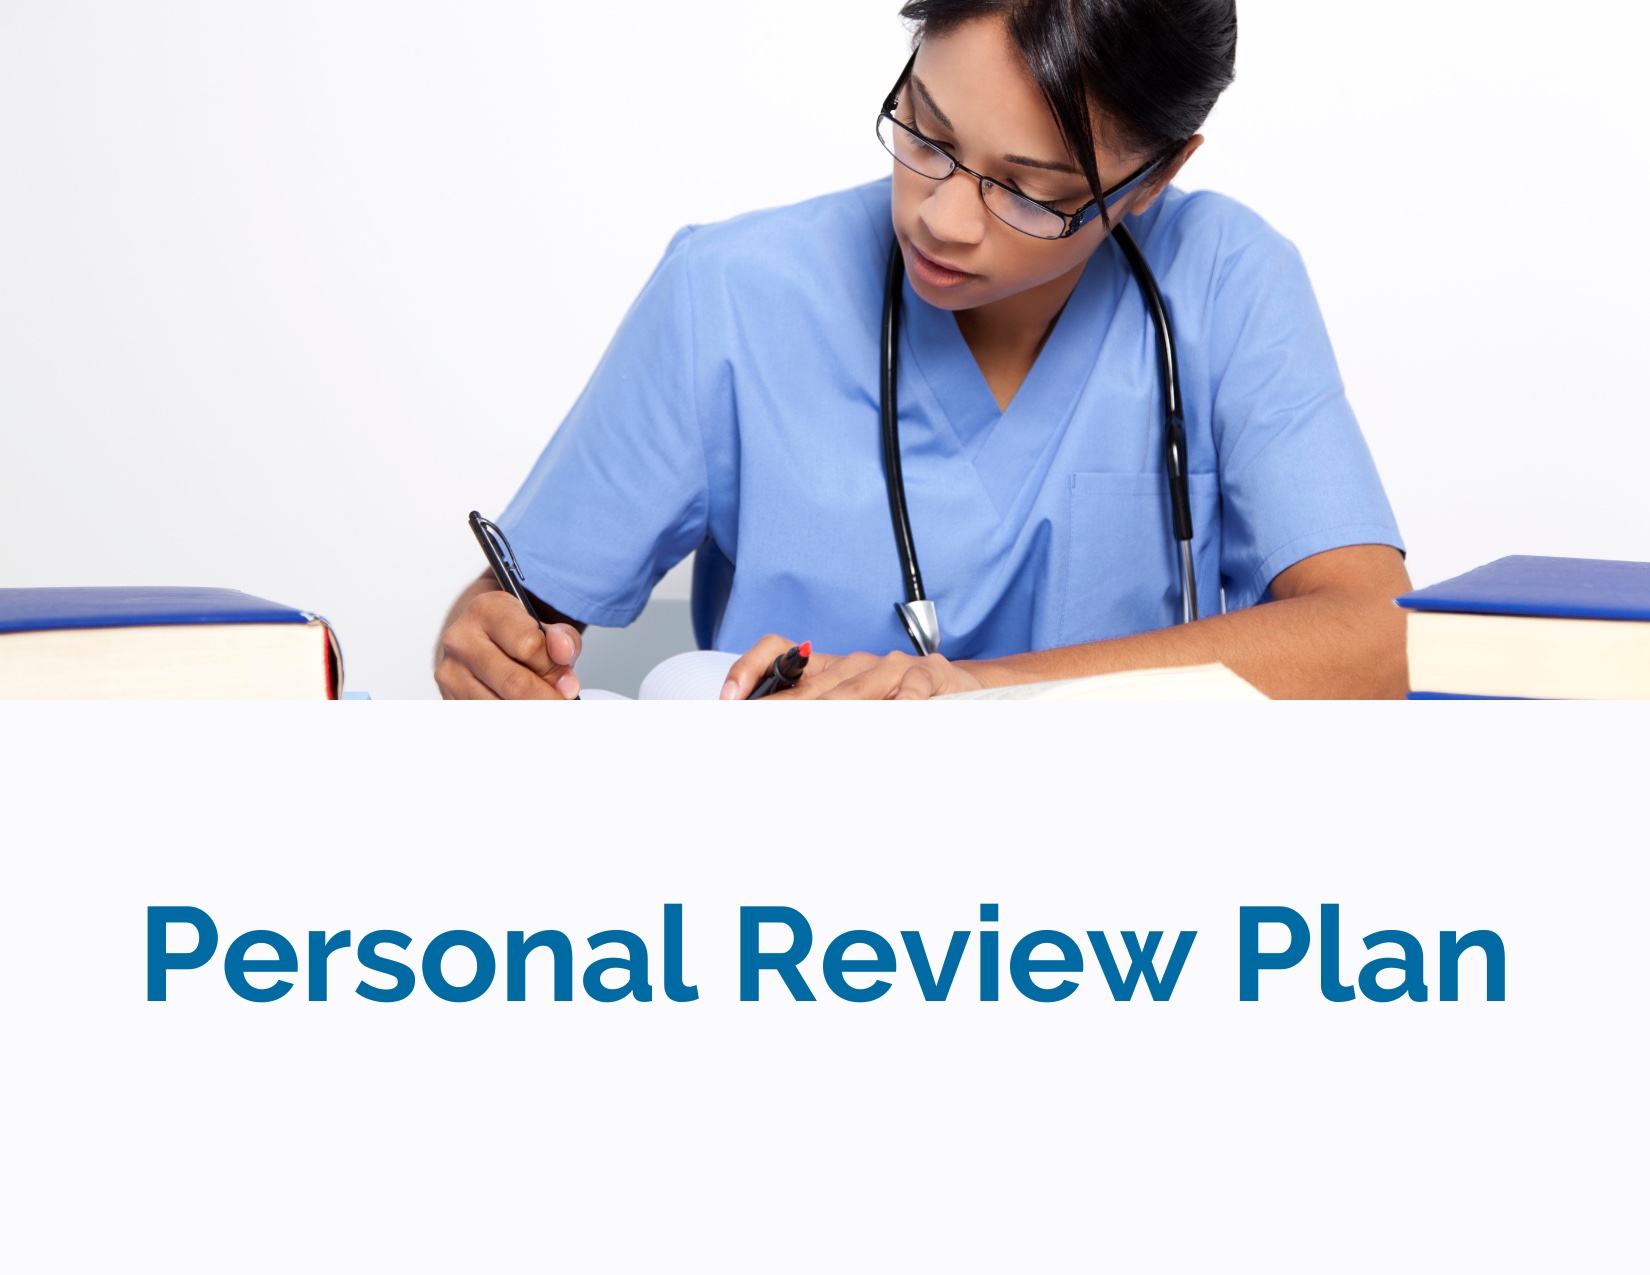 Personal Review Plan Image Only